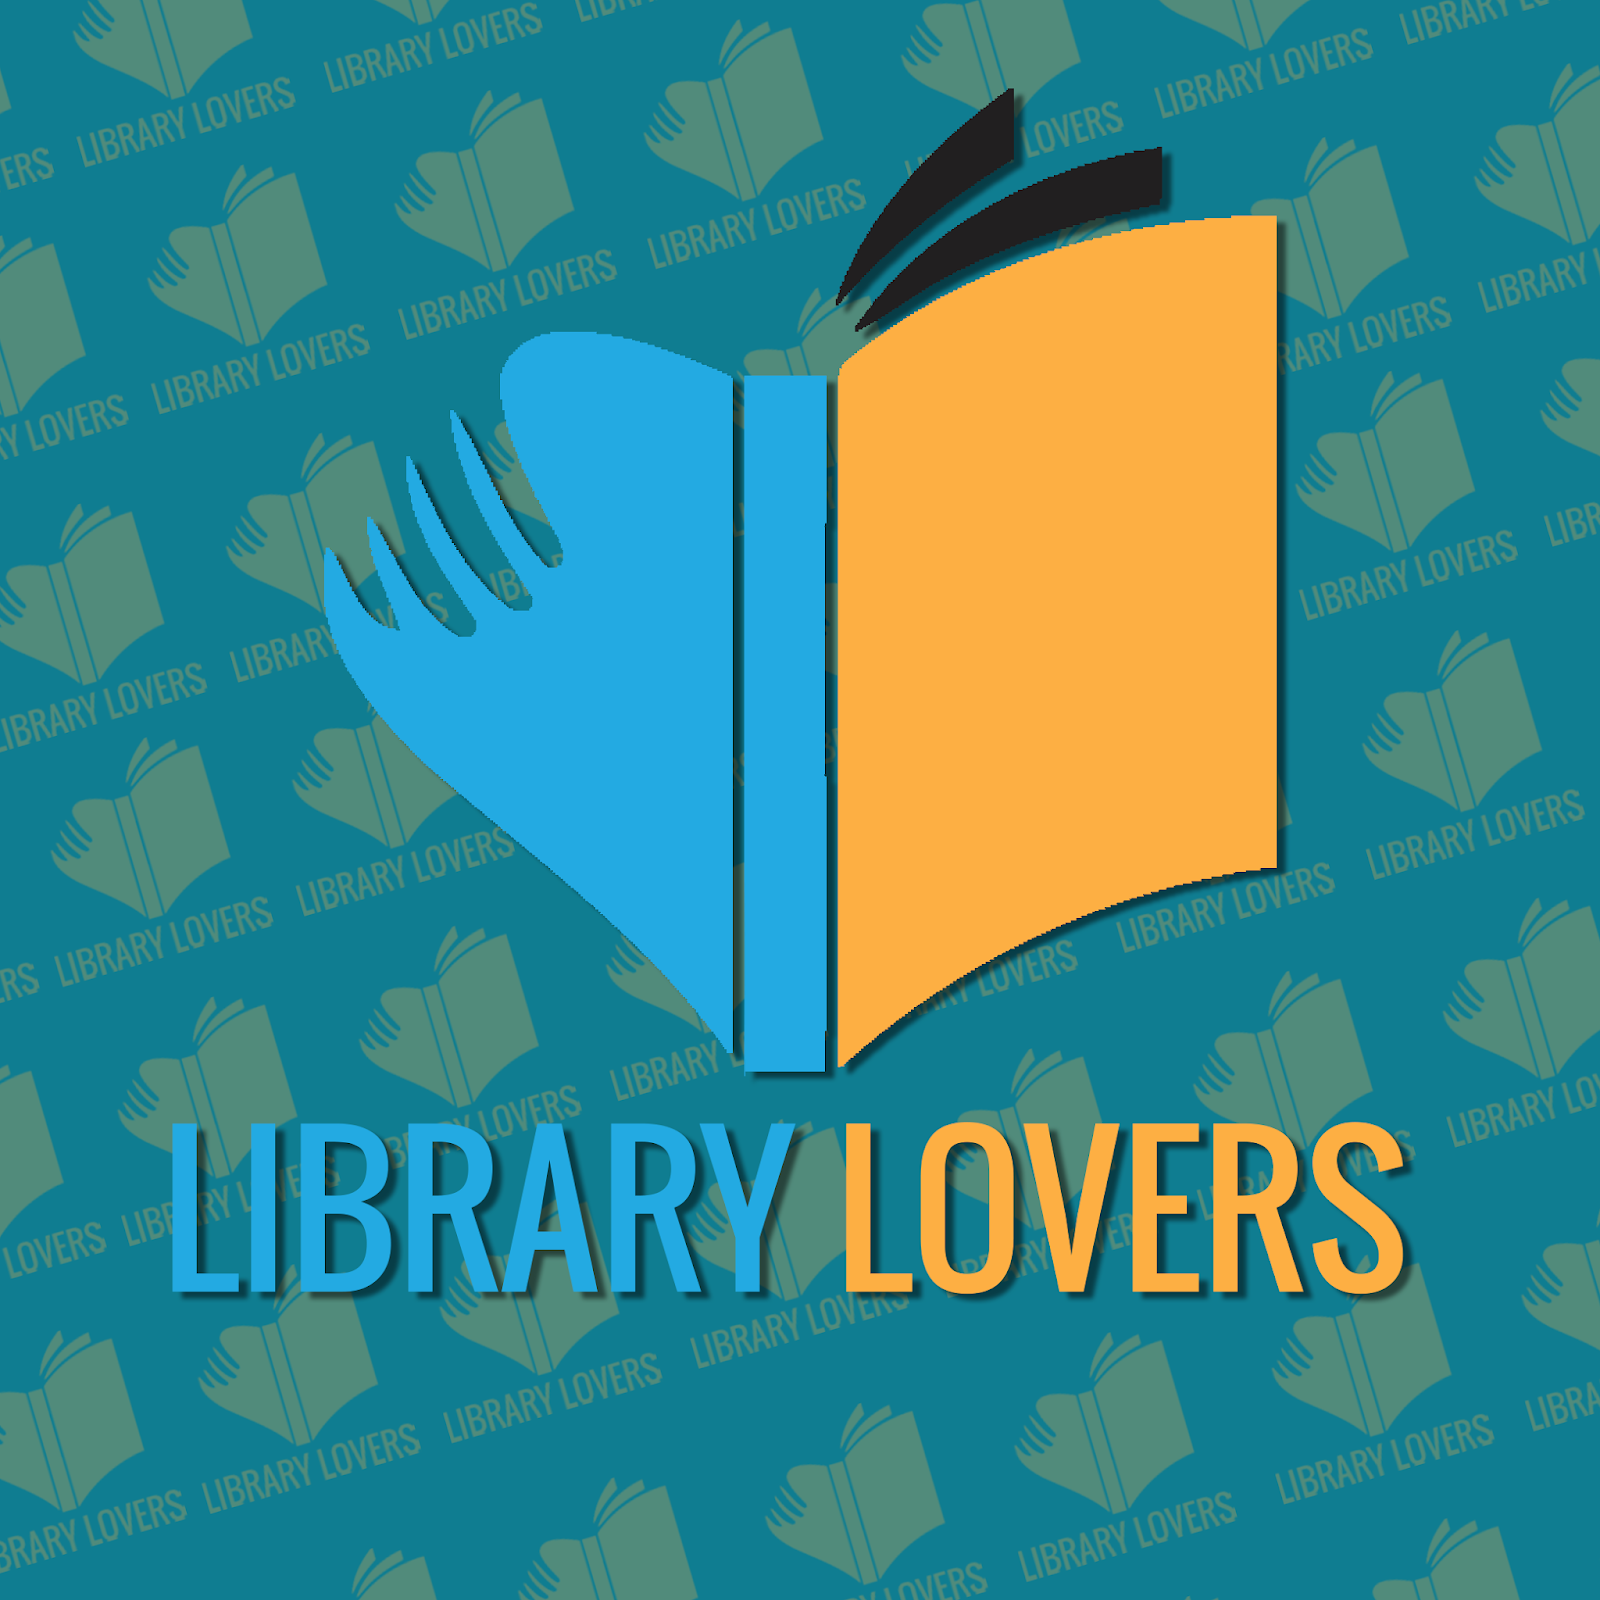 LIBRARY LOVERS